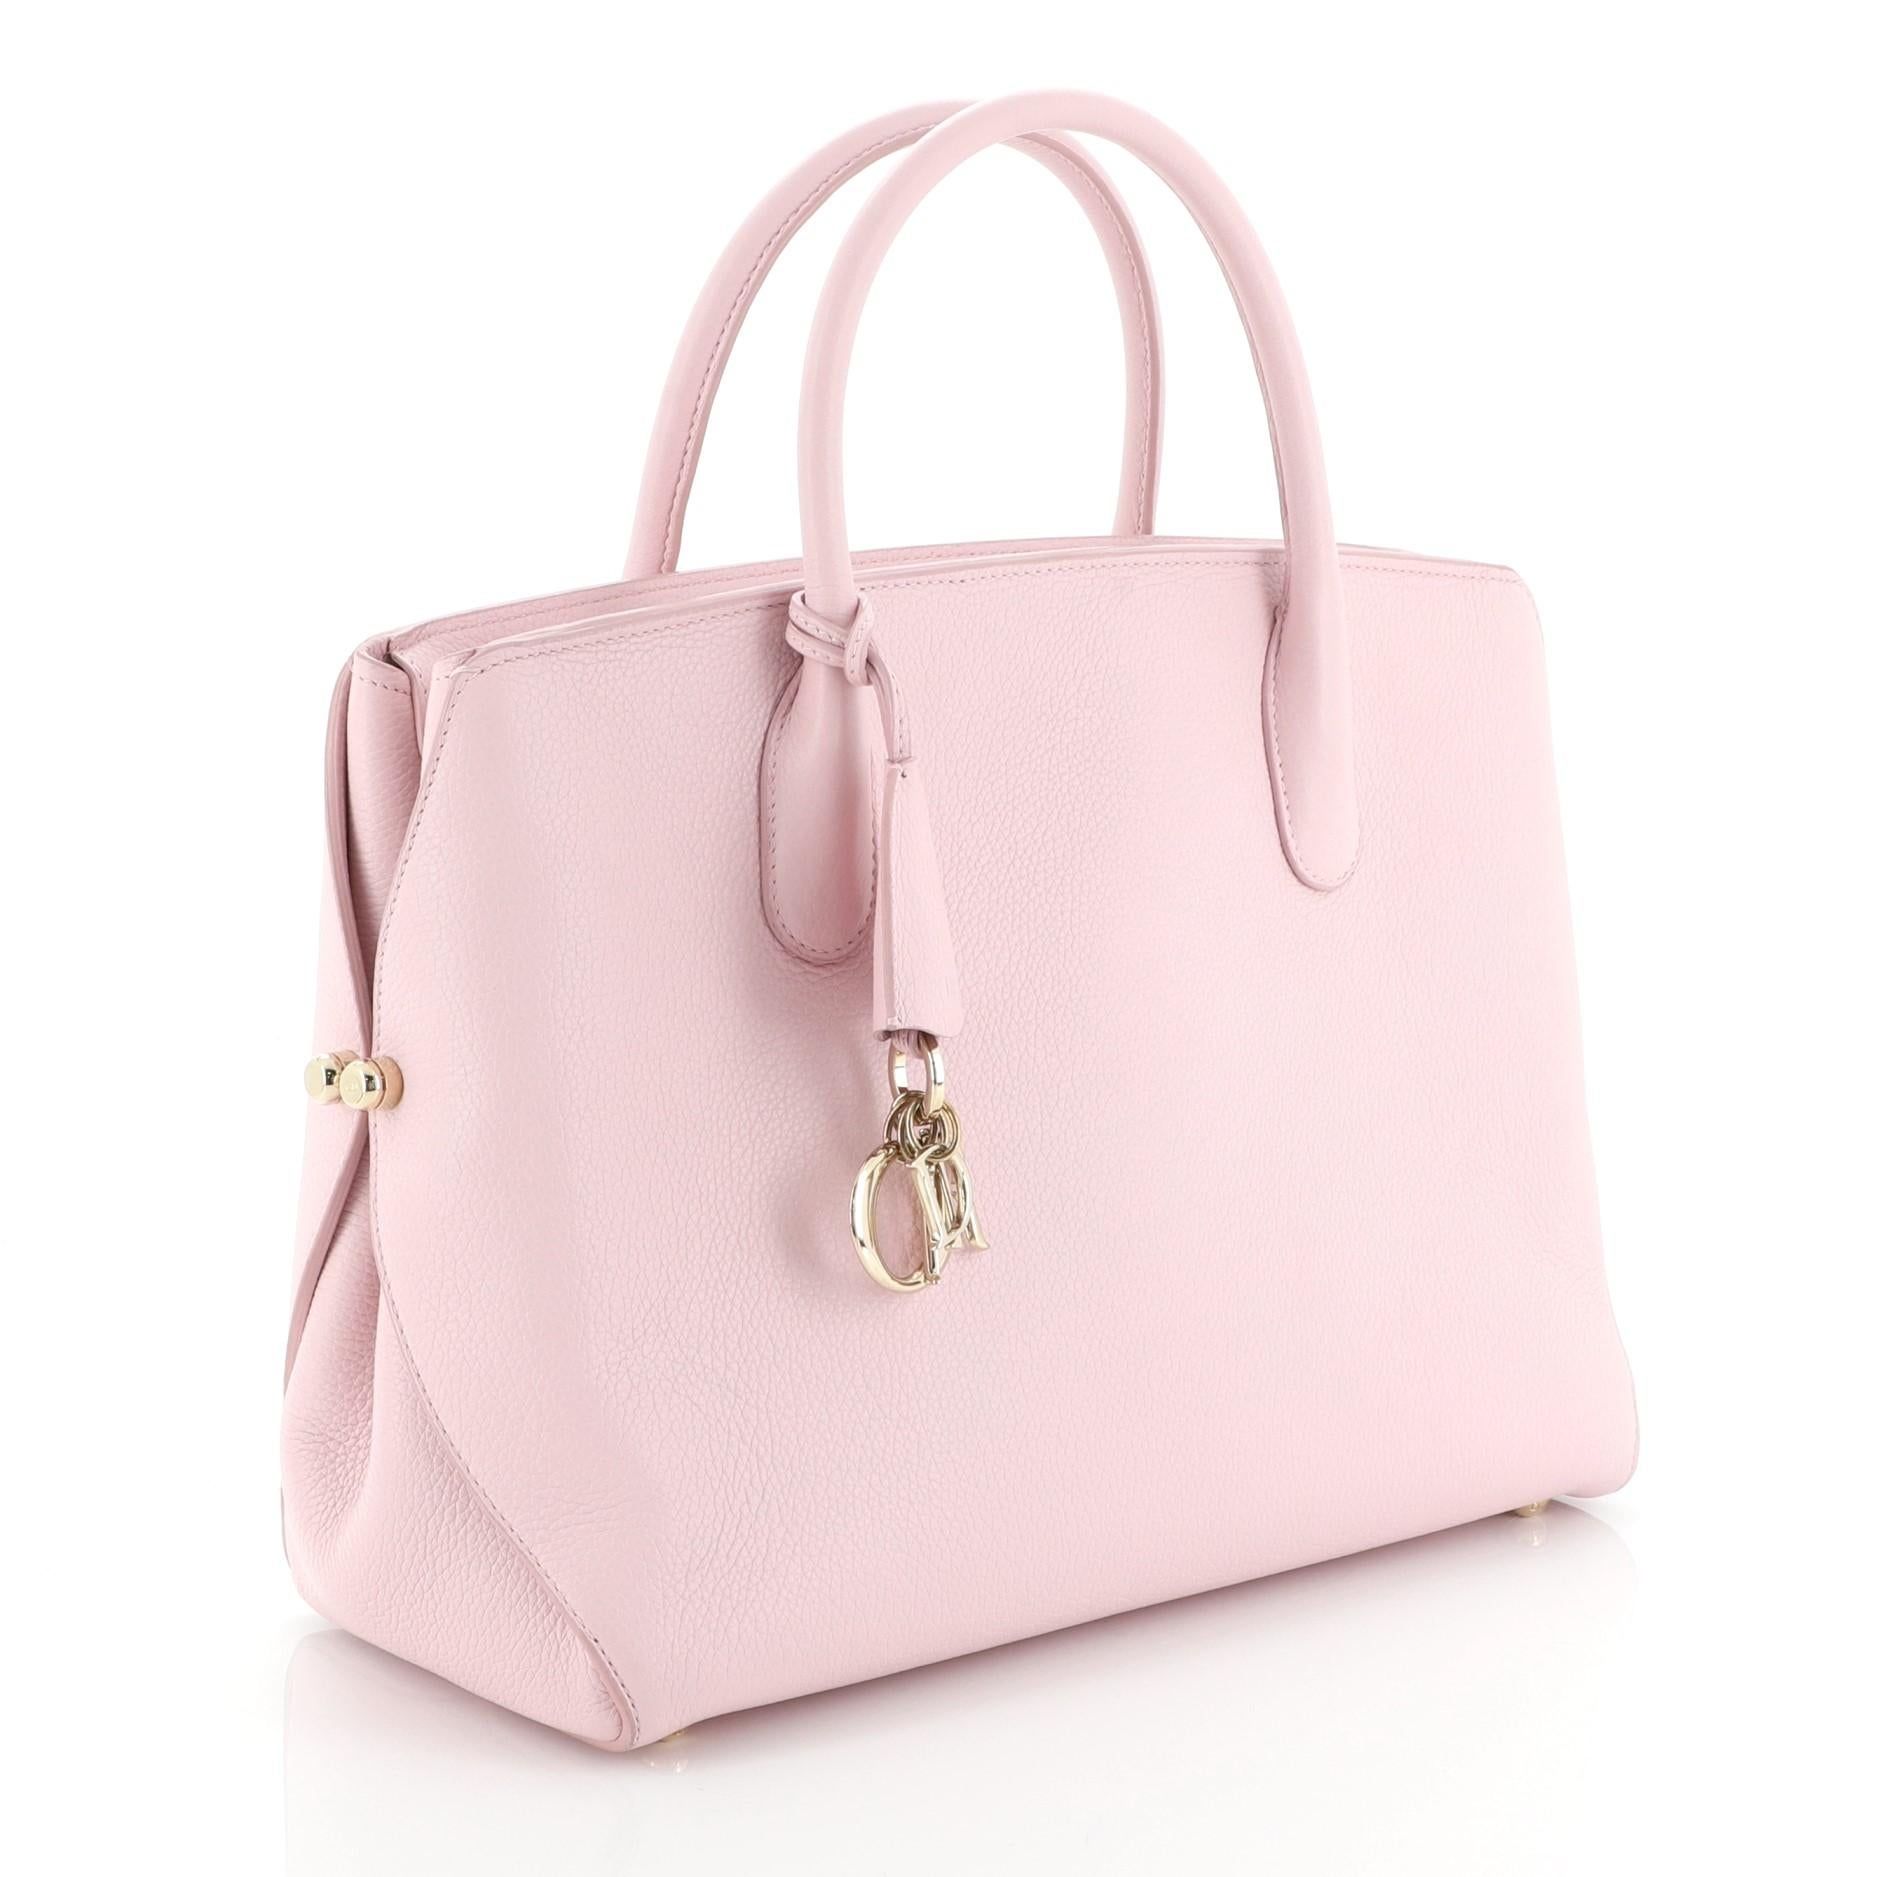 This Christian Dior Bar Bag Leather Medium, crafted from pink leather, features dual rolled handles, Dior charms and gold-tone hardware. Its zip closure opens to a pink leather interior. 

Estimated Retail Price: $4,800
Condition: Damaged. Repainted